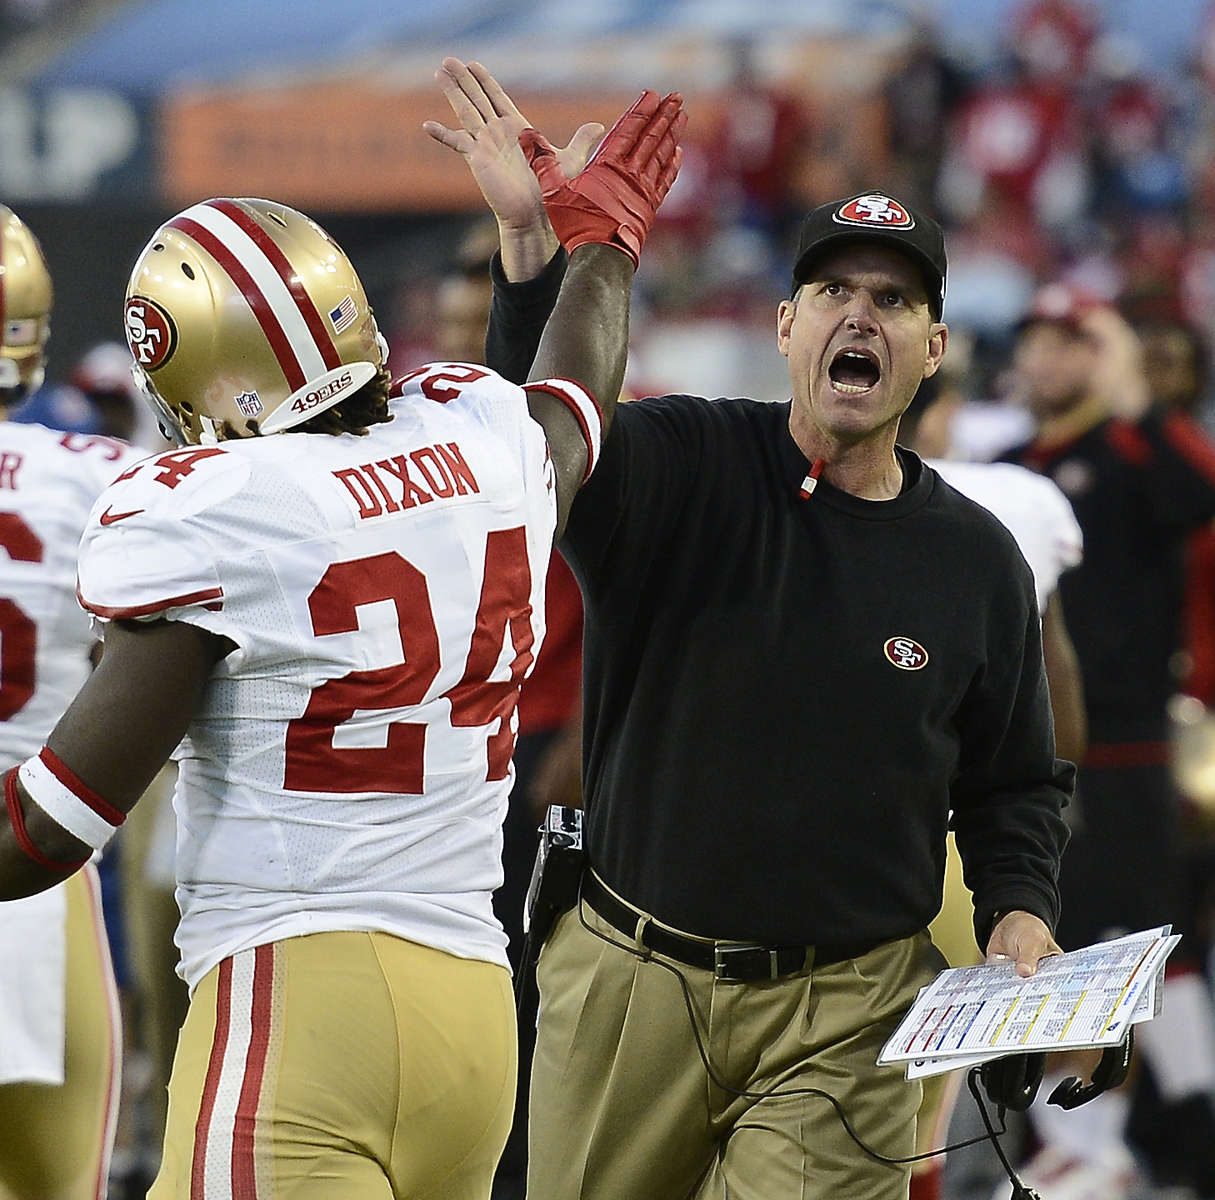 San Francisco 49ers head coach Jim Harbaugh high-fives Anthony Dixon after the 49ers recover a Tennessee Titans fumble for a touchdown in the fourth quarter of an NFL football game on Oct. 20, 2013, in Nashville, Tenn. (AP Photo/  Mark Zaleski)